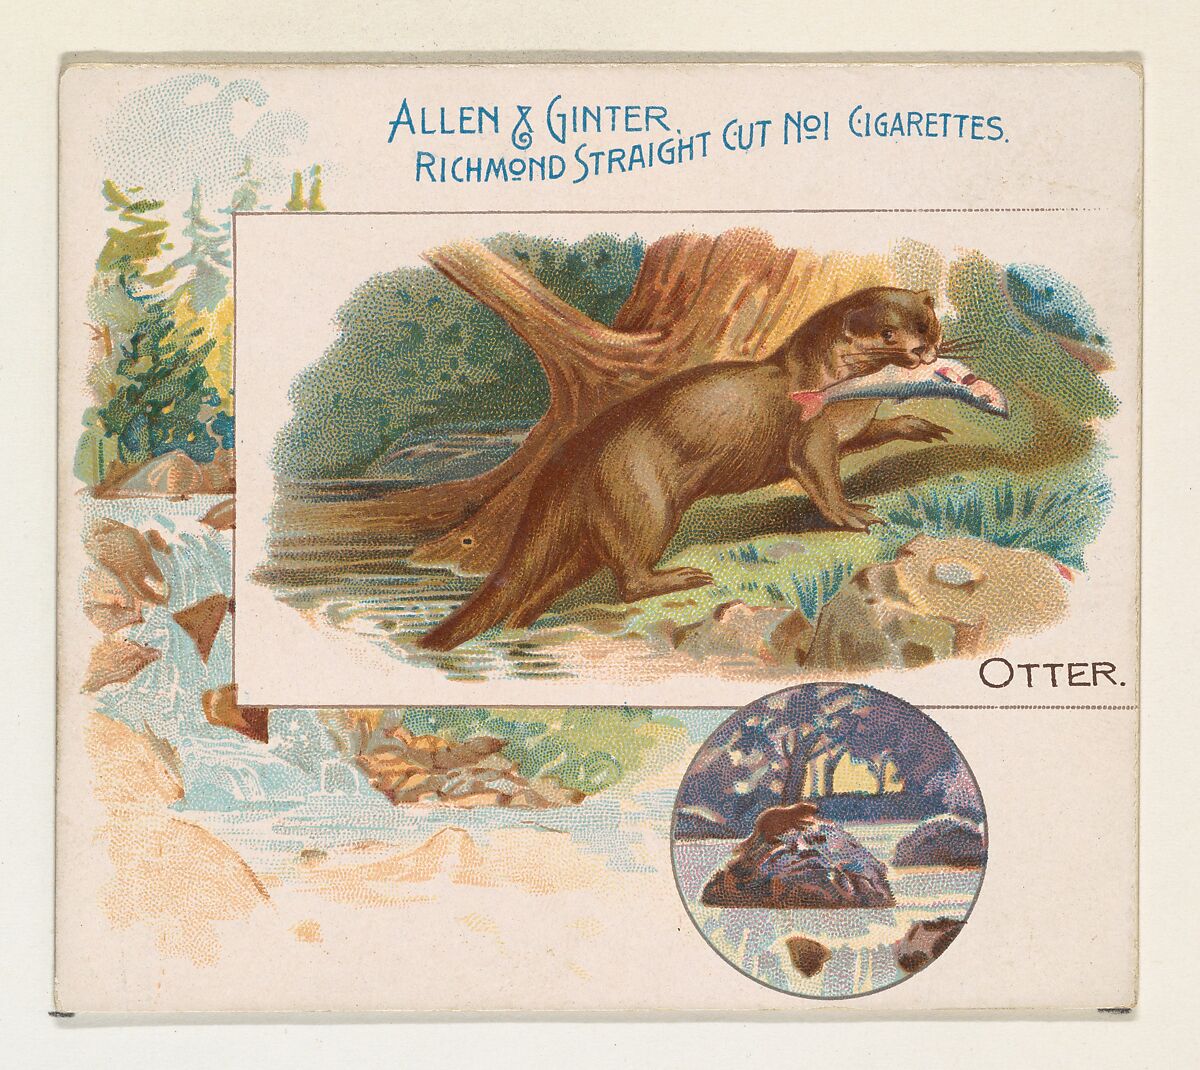 Otter, from Quadrupeds series (N41) for Allen & Ginter Cigarettes, Issued by Allen &amp; Ginter (American, Richmond, Virginia), Commercial color lithograph 